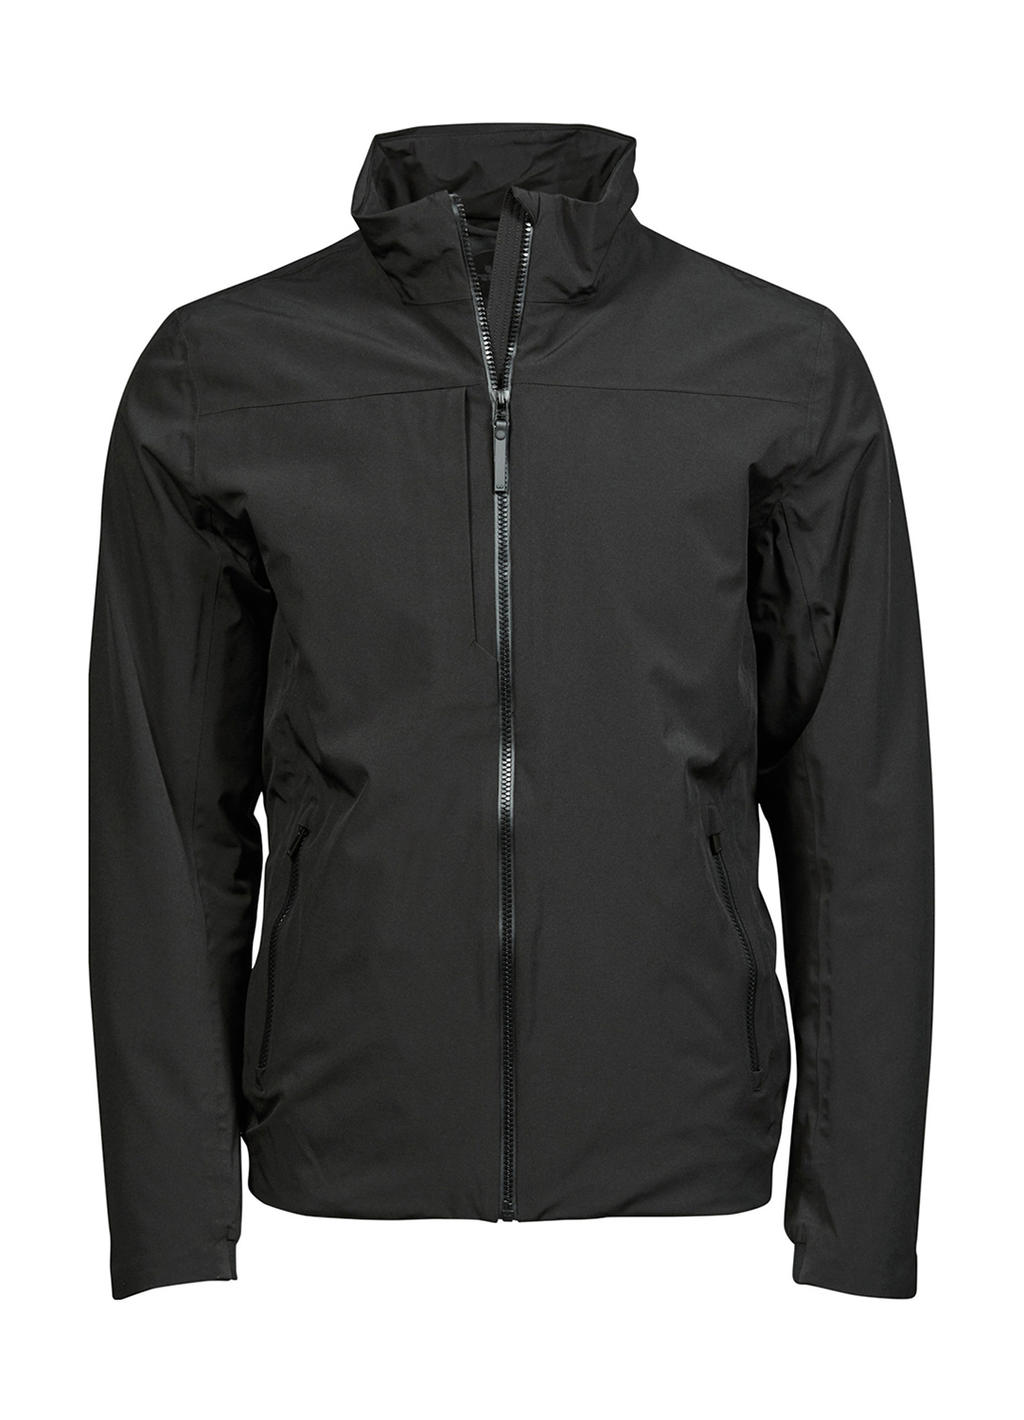  All Weather Jacket in Farbe Black